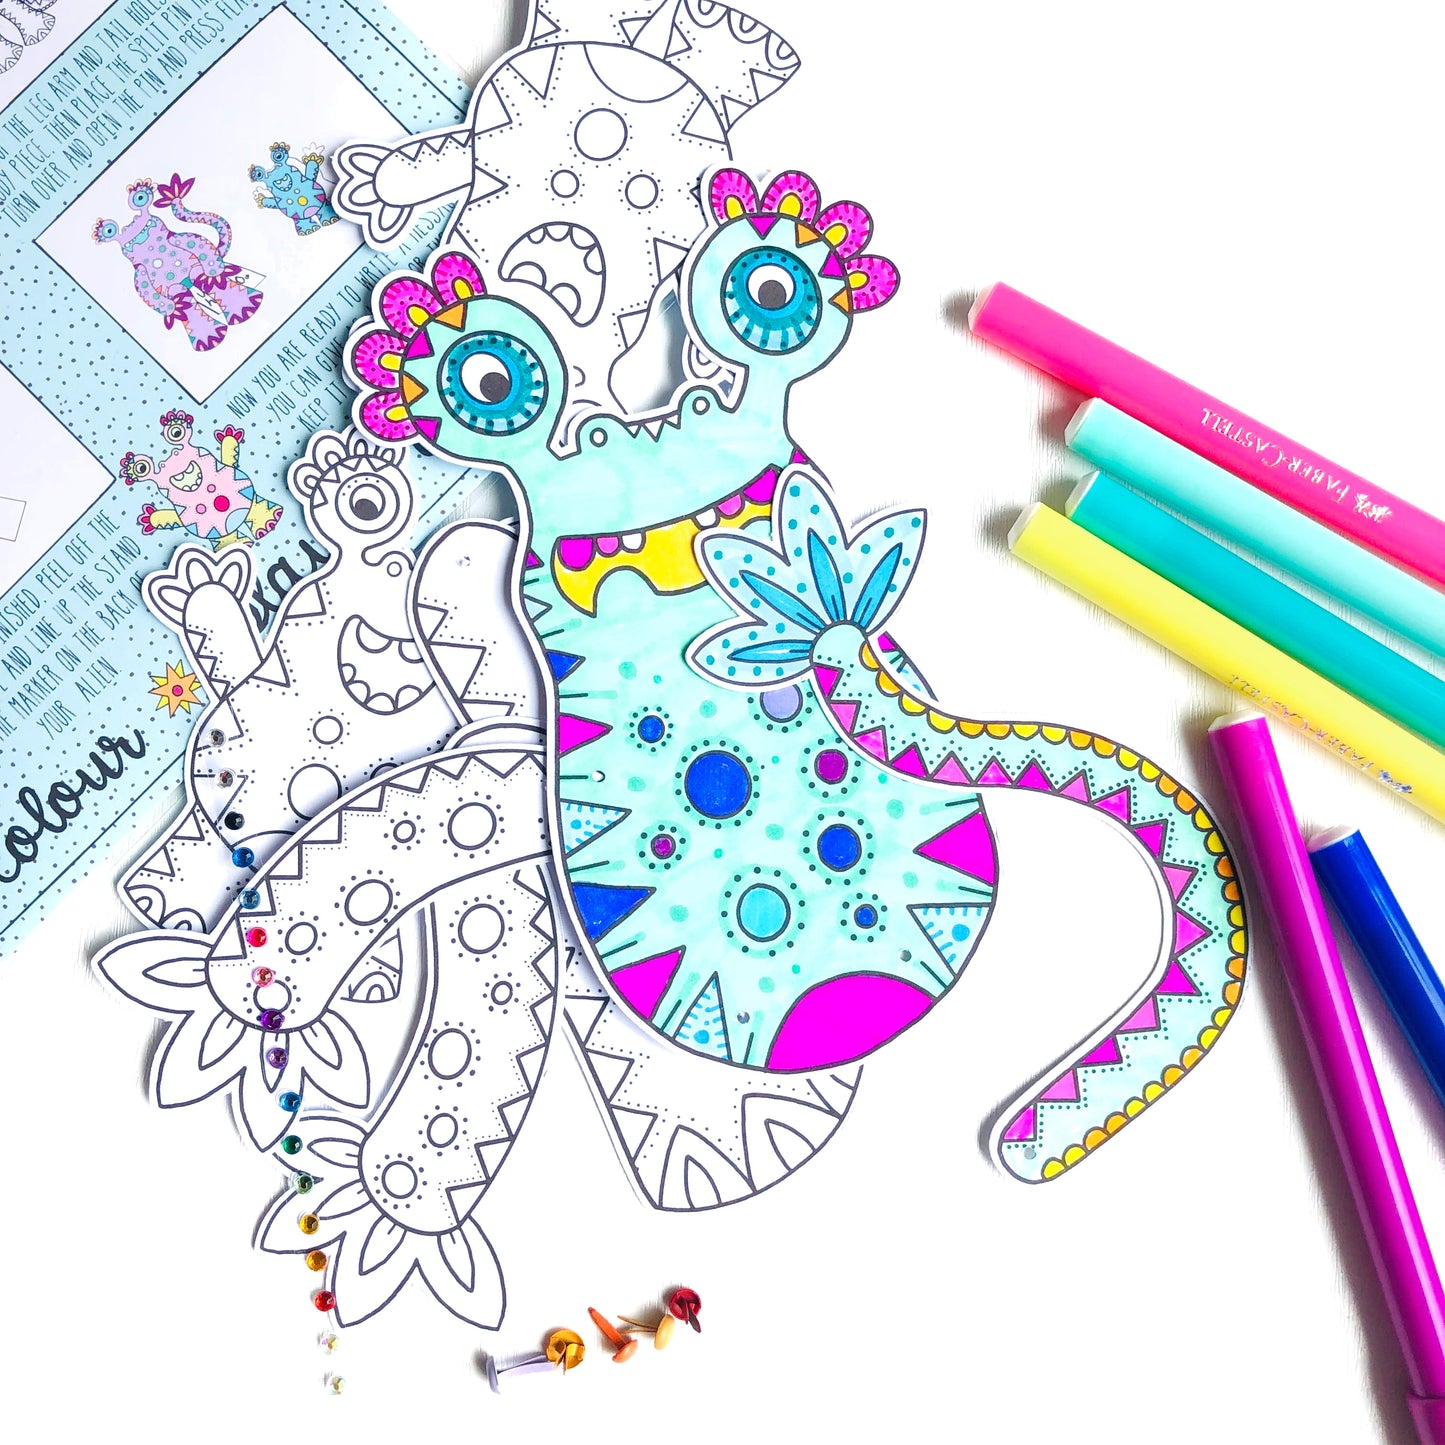 colour in your alien with pens or pencils for a mess free craft